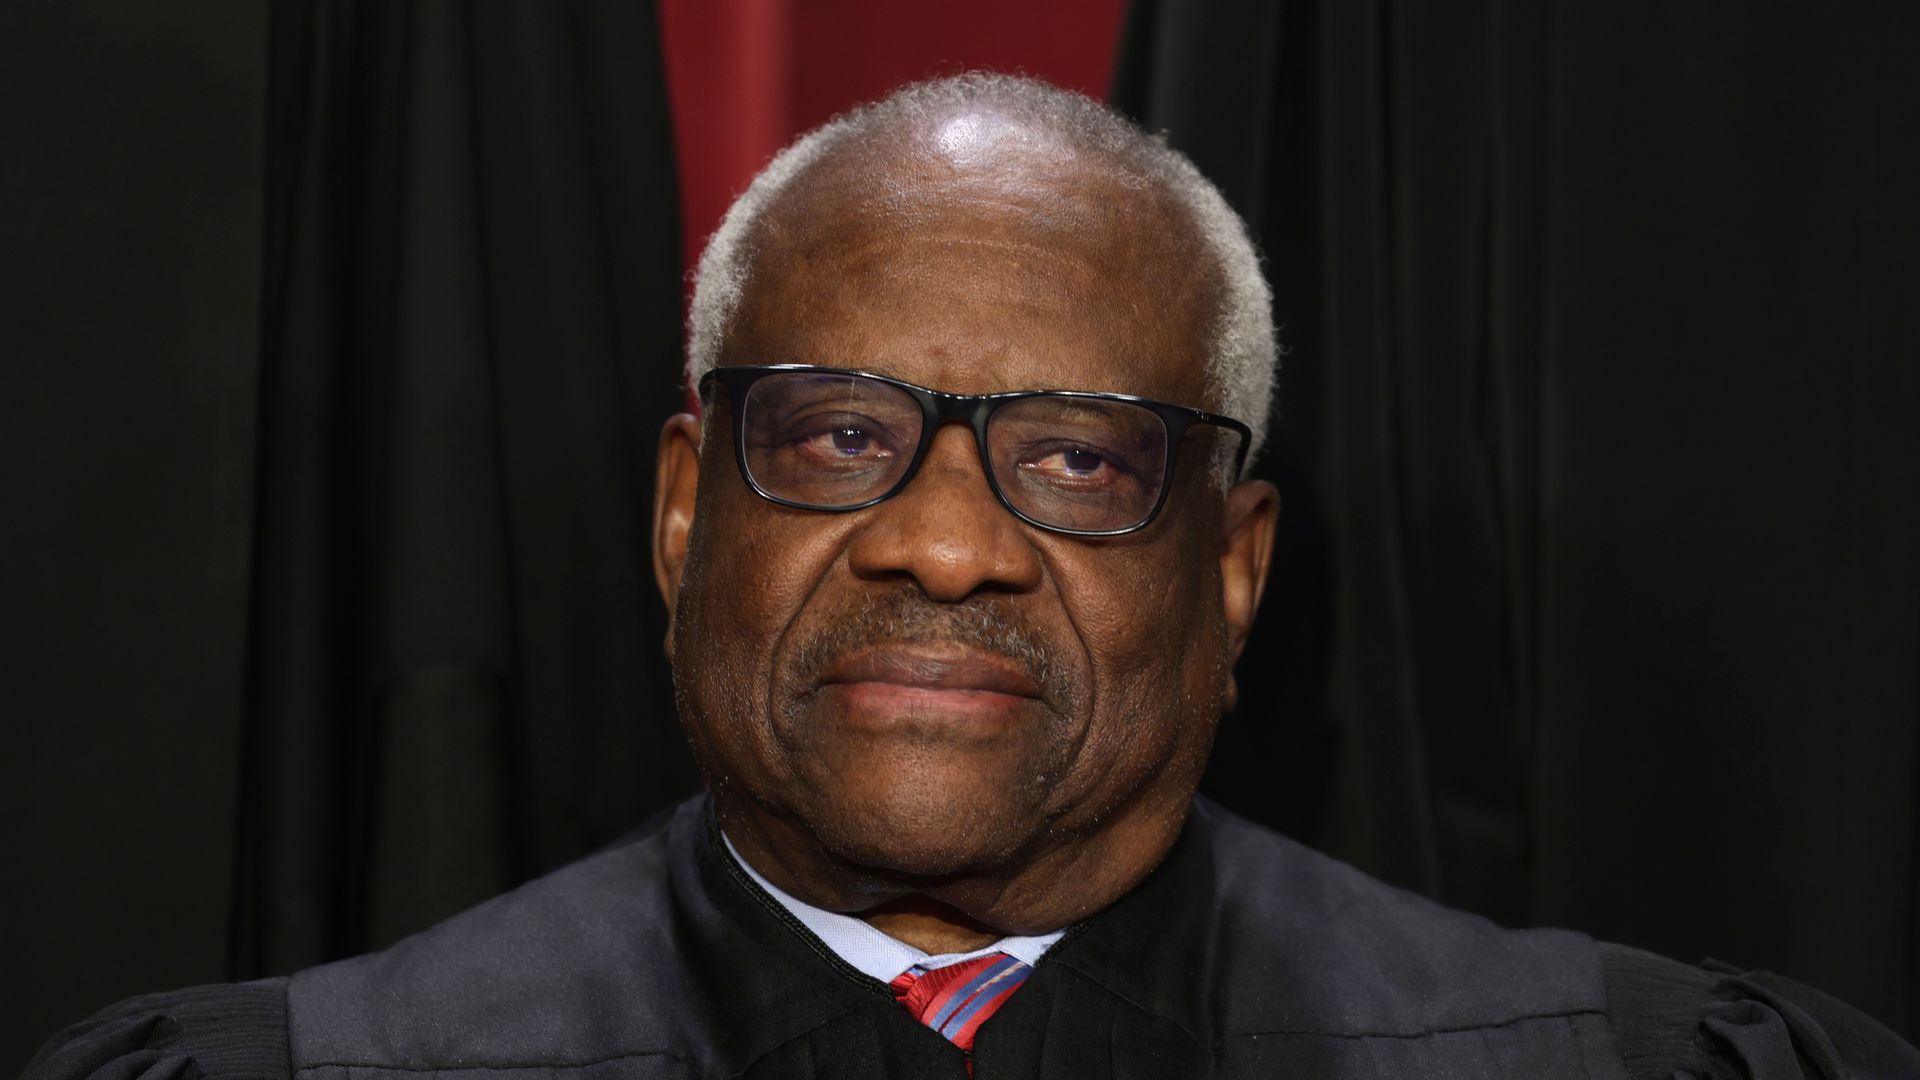 Supreme Court Associate Justice Clarence Thomas poses for an official portrait at the East Conference Room of the Supreme Court building on October 7, 2022